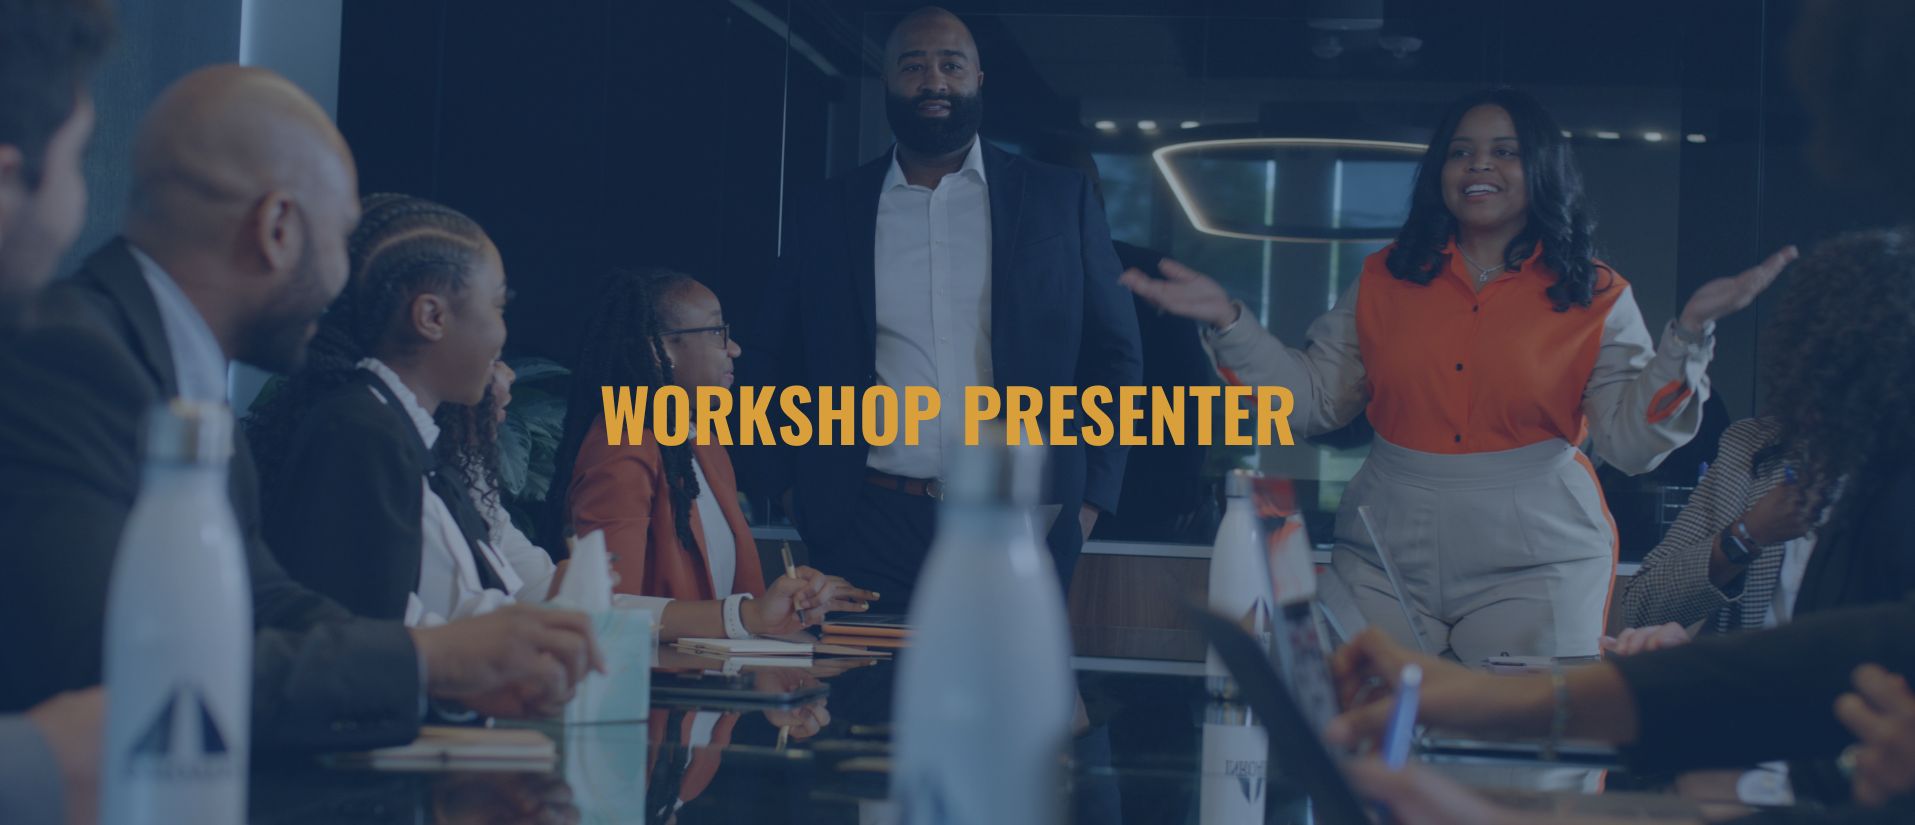 Featured image for “Volunteers Needed! Become a Workshop Presenter”